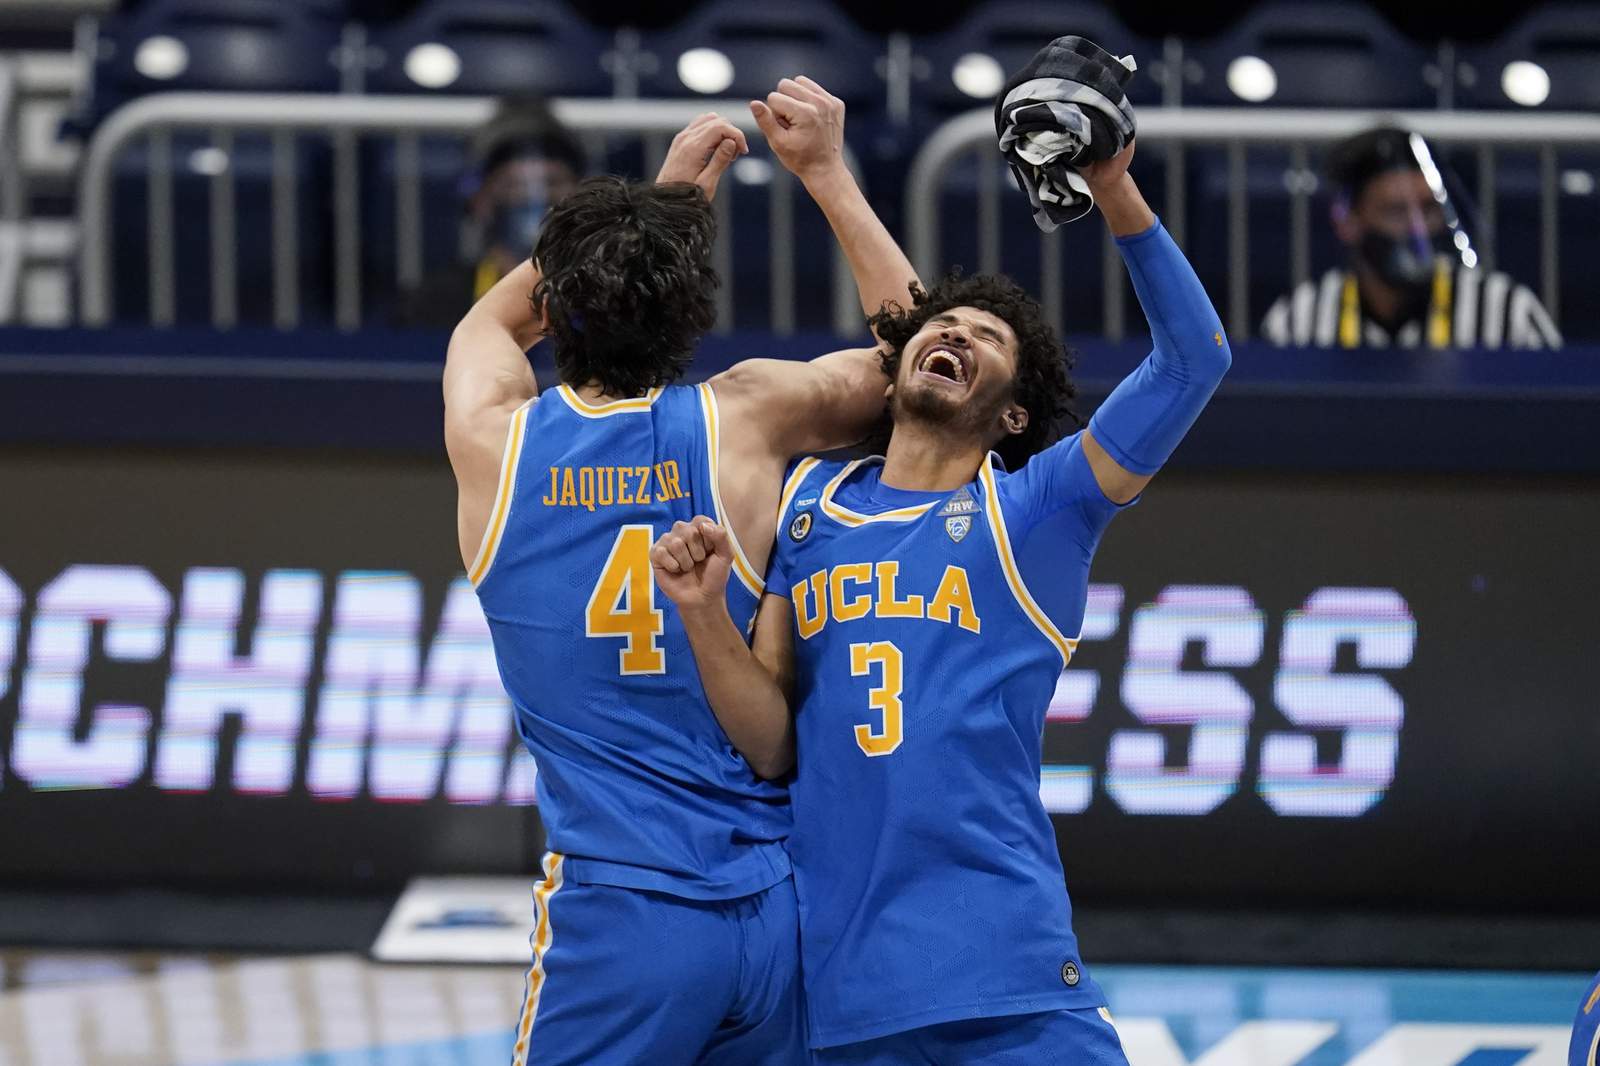 UCLA's Juzang Could Be First Asian American NBA Lottery Pick